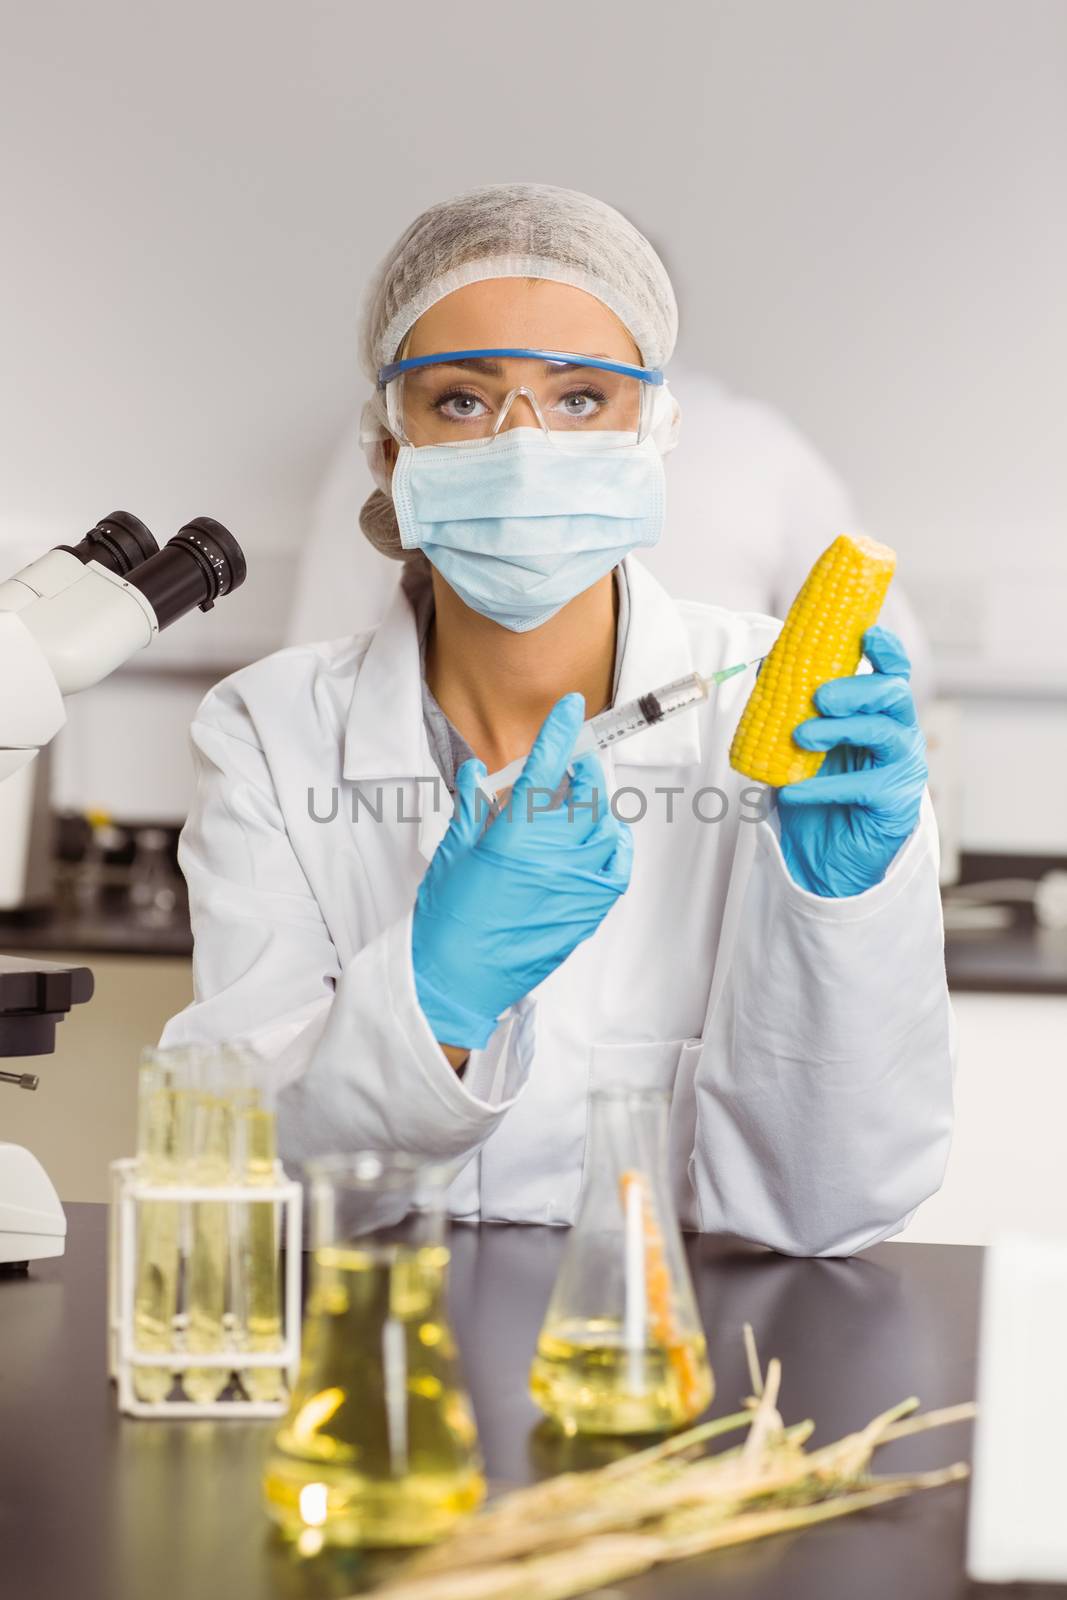 Food scientist injecting a corn cob at the university